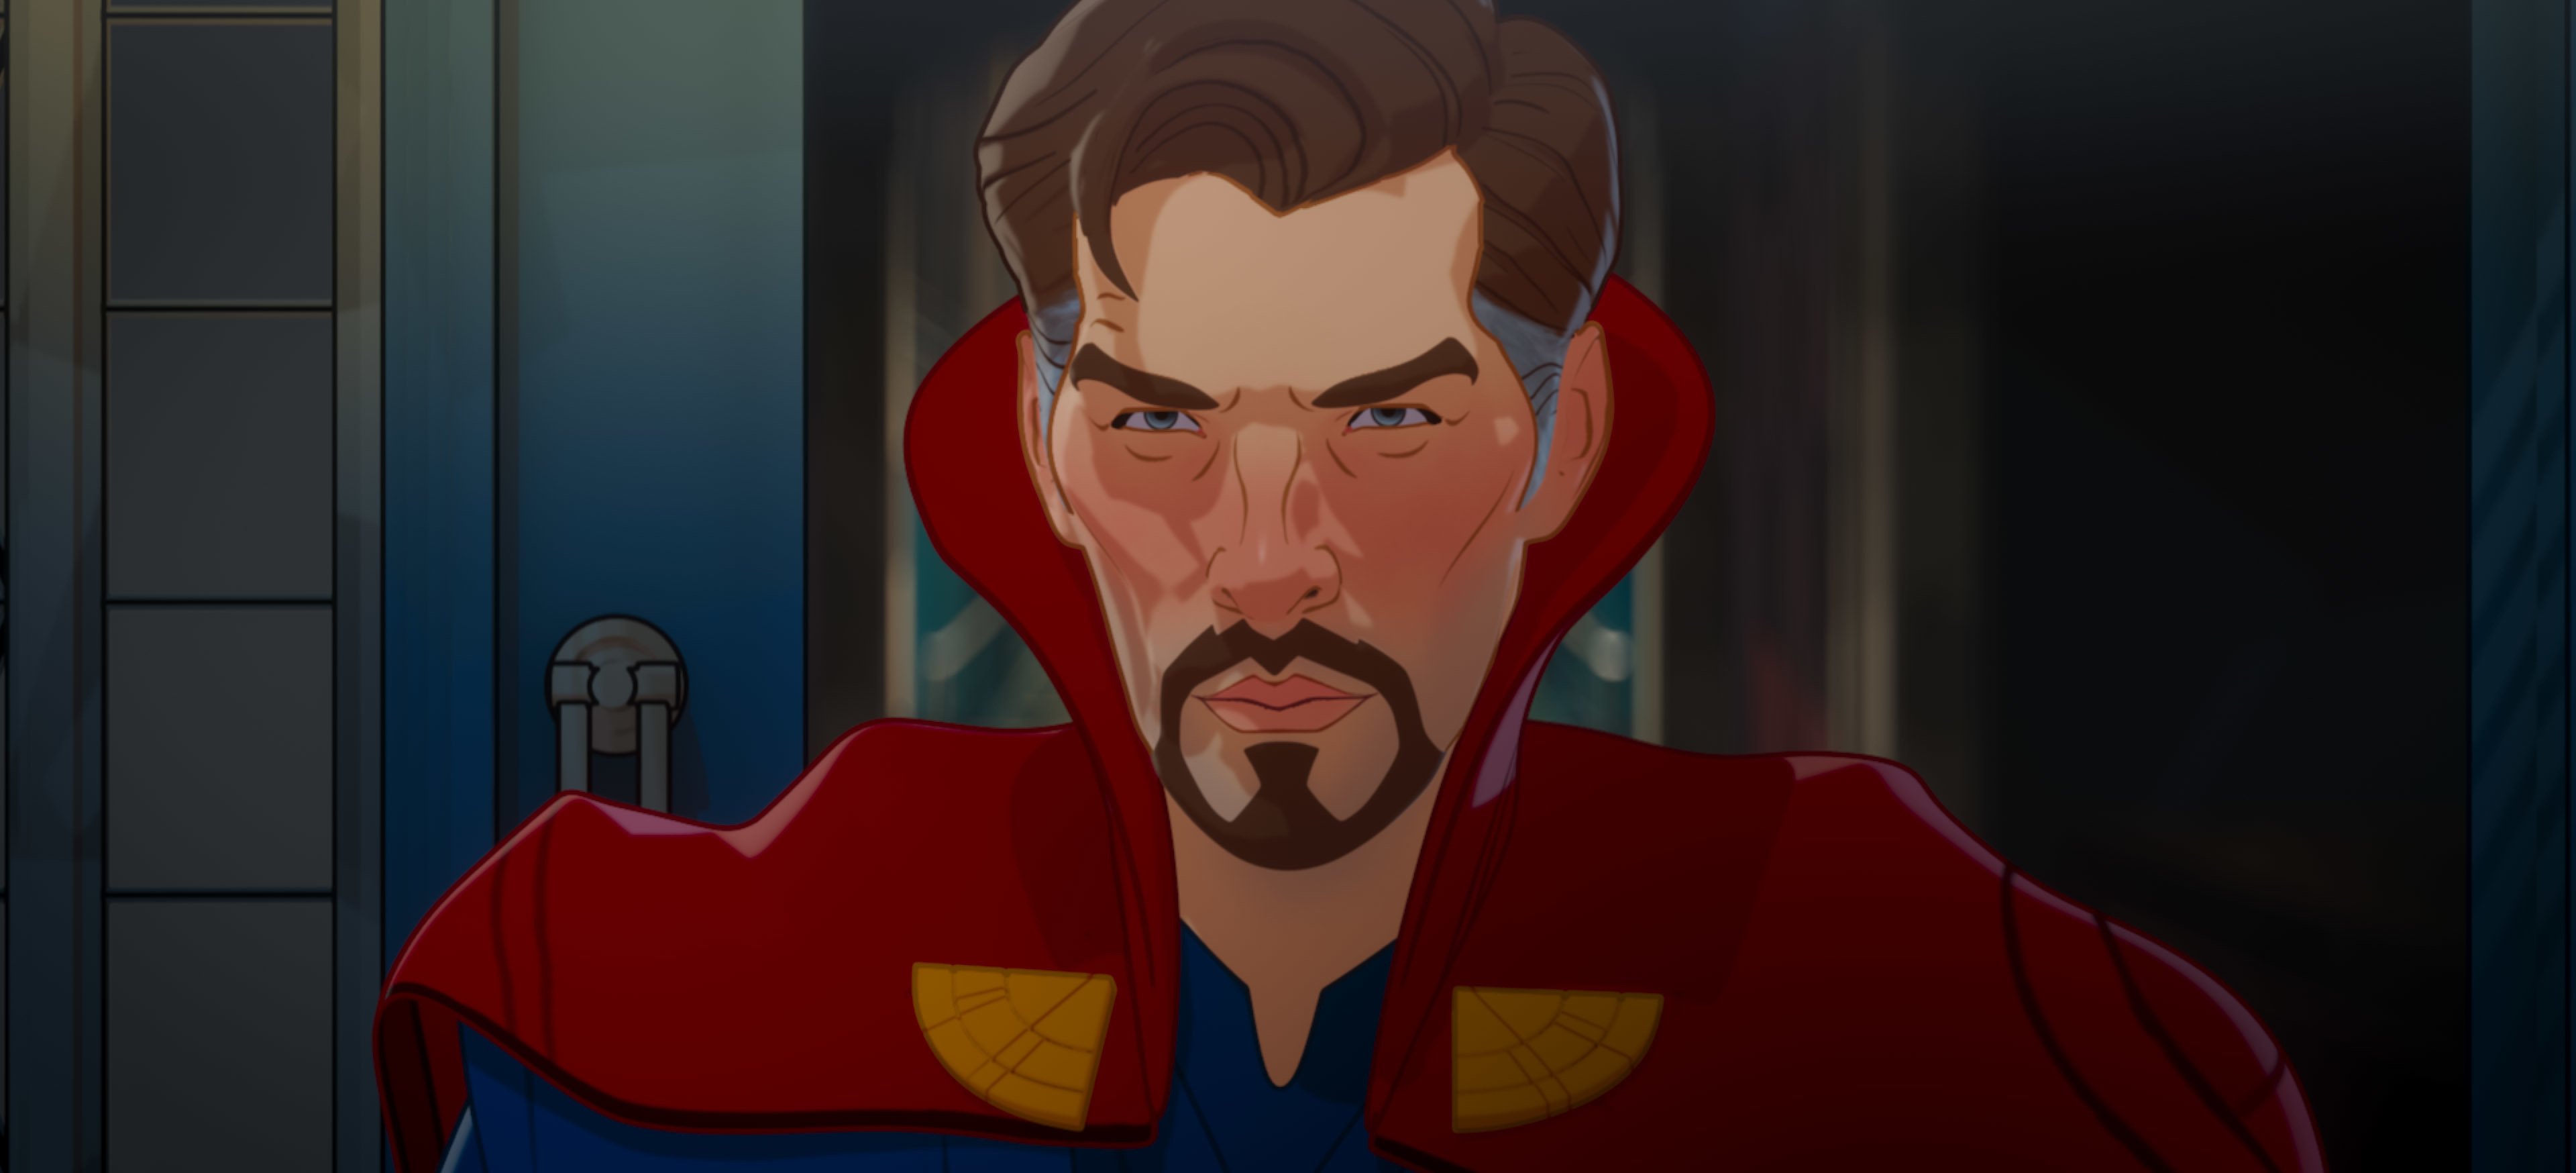 Marvel's 'What If...?' Episode 4 features Doctor Strange in animated form